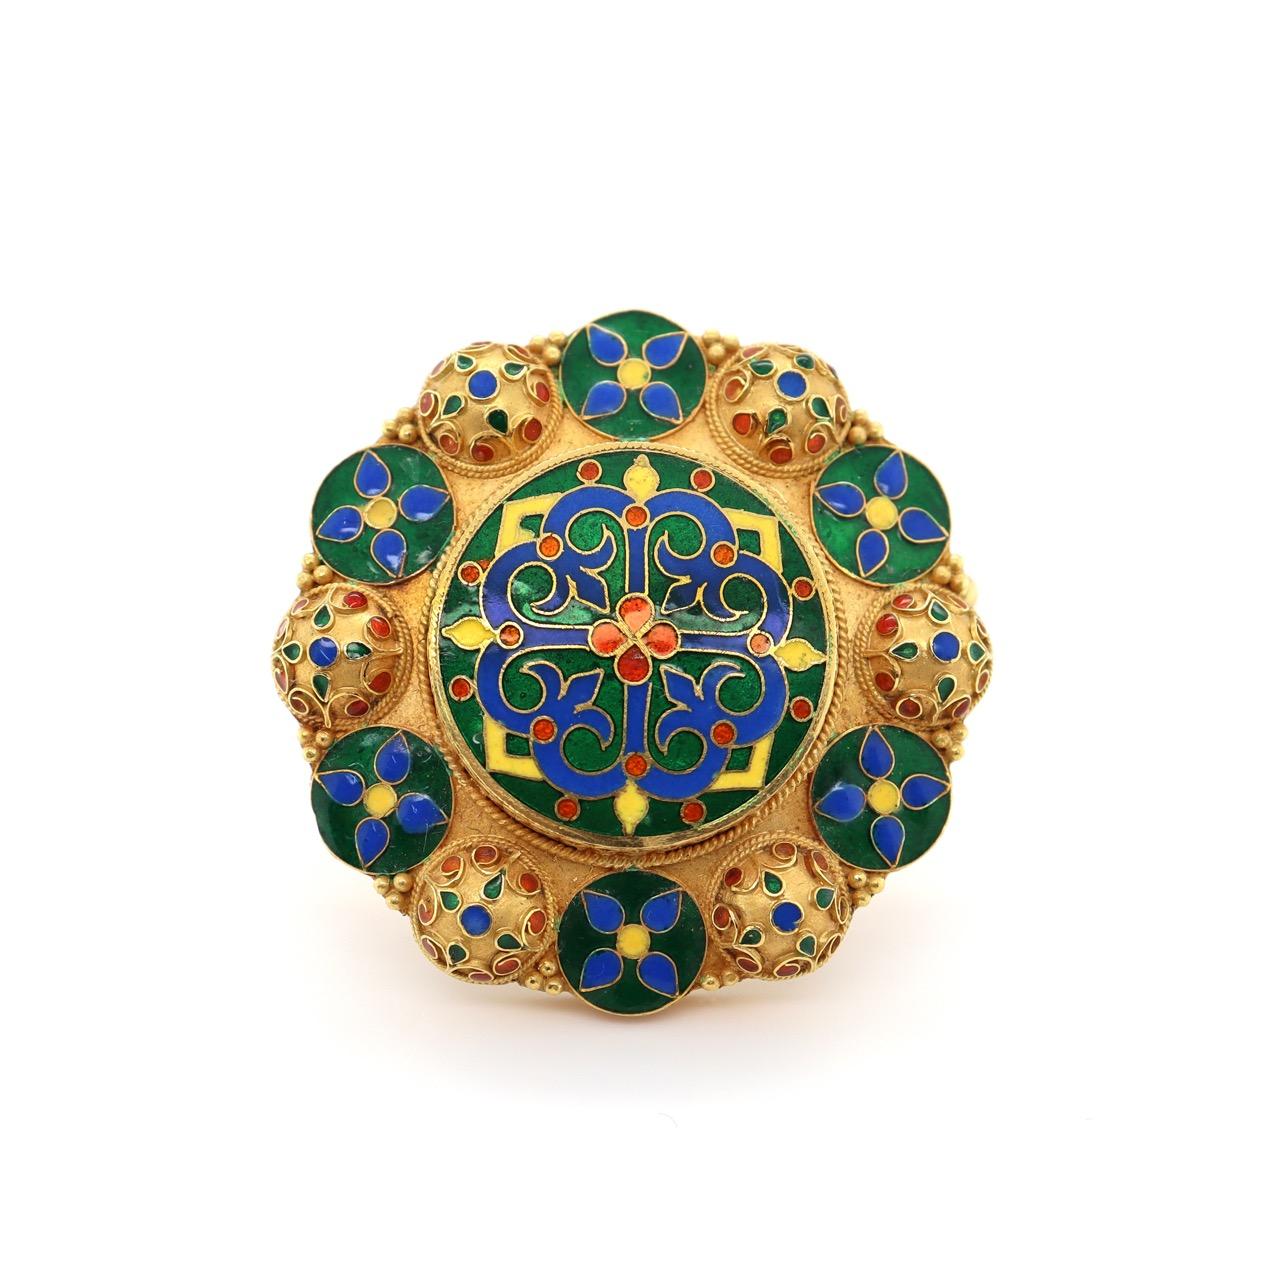 Lalaounis Cross Mandala Brooch, ca. 1950s/1960s

An early brooch from the Greek designer Ilias Lalaounis, depicting a cross in the centre in multi-coloured enamel work, surrounded by Mandala like domes and circles. This brooch shows beautifully the